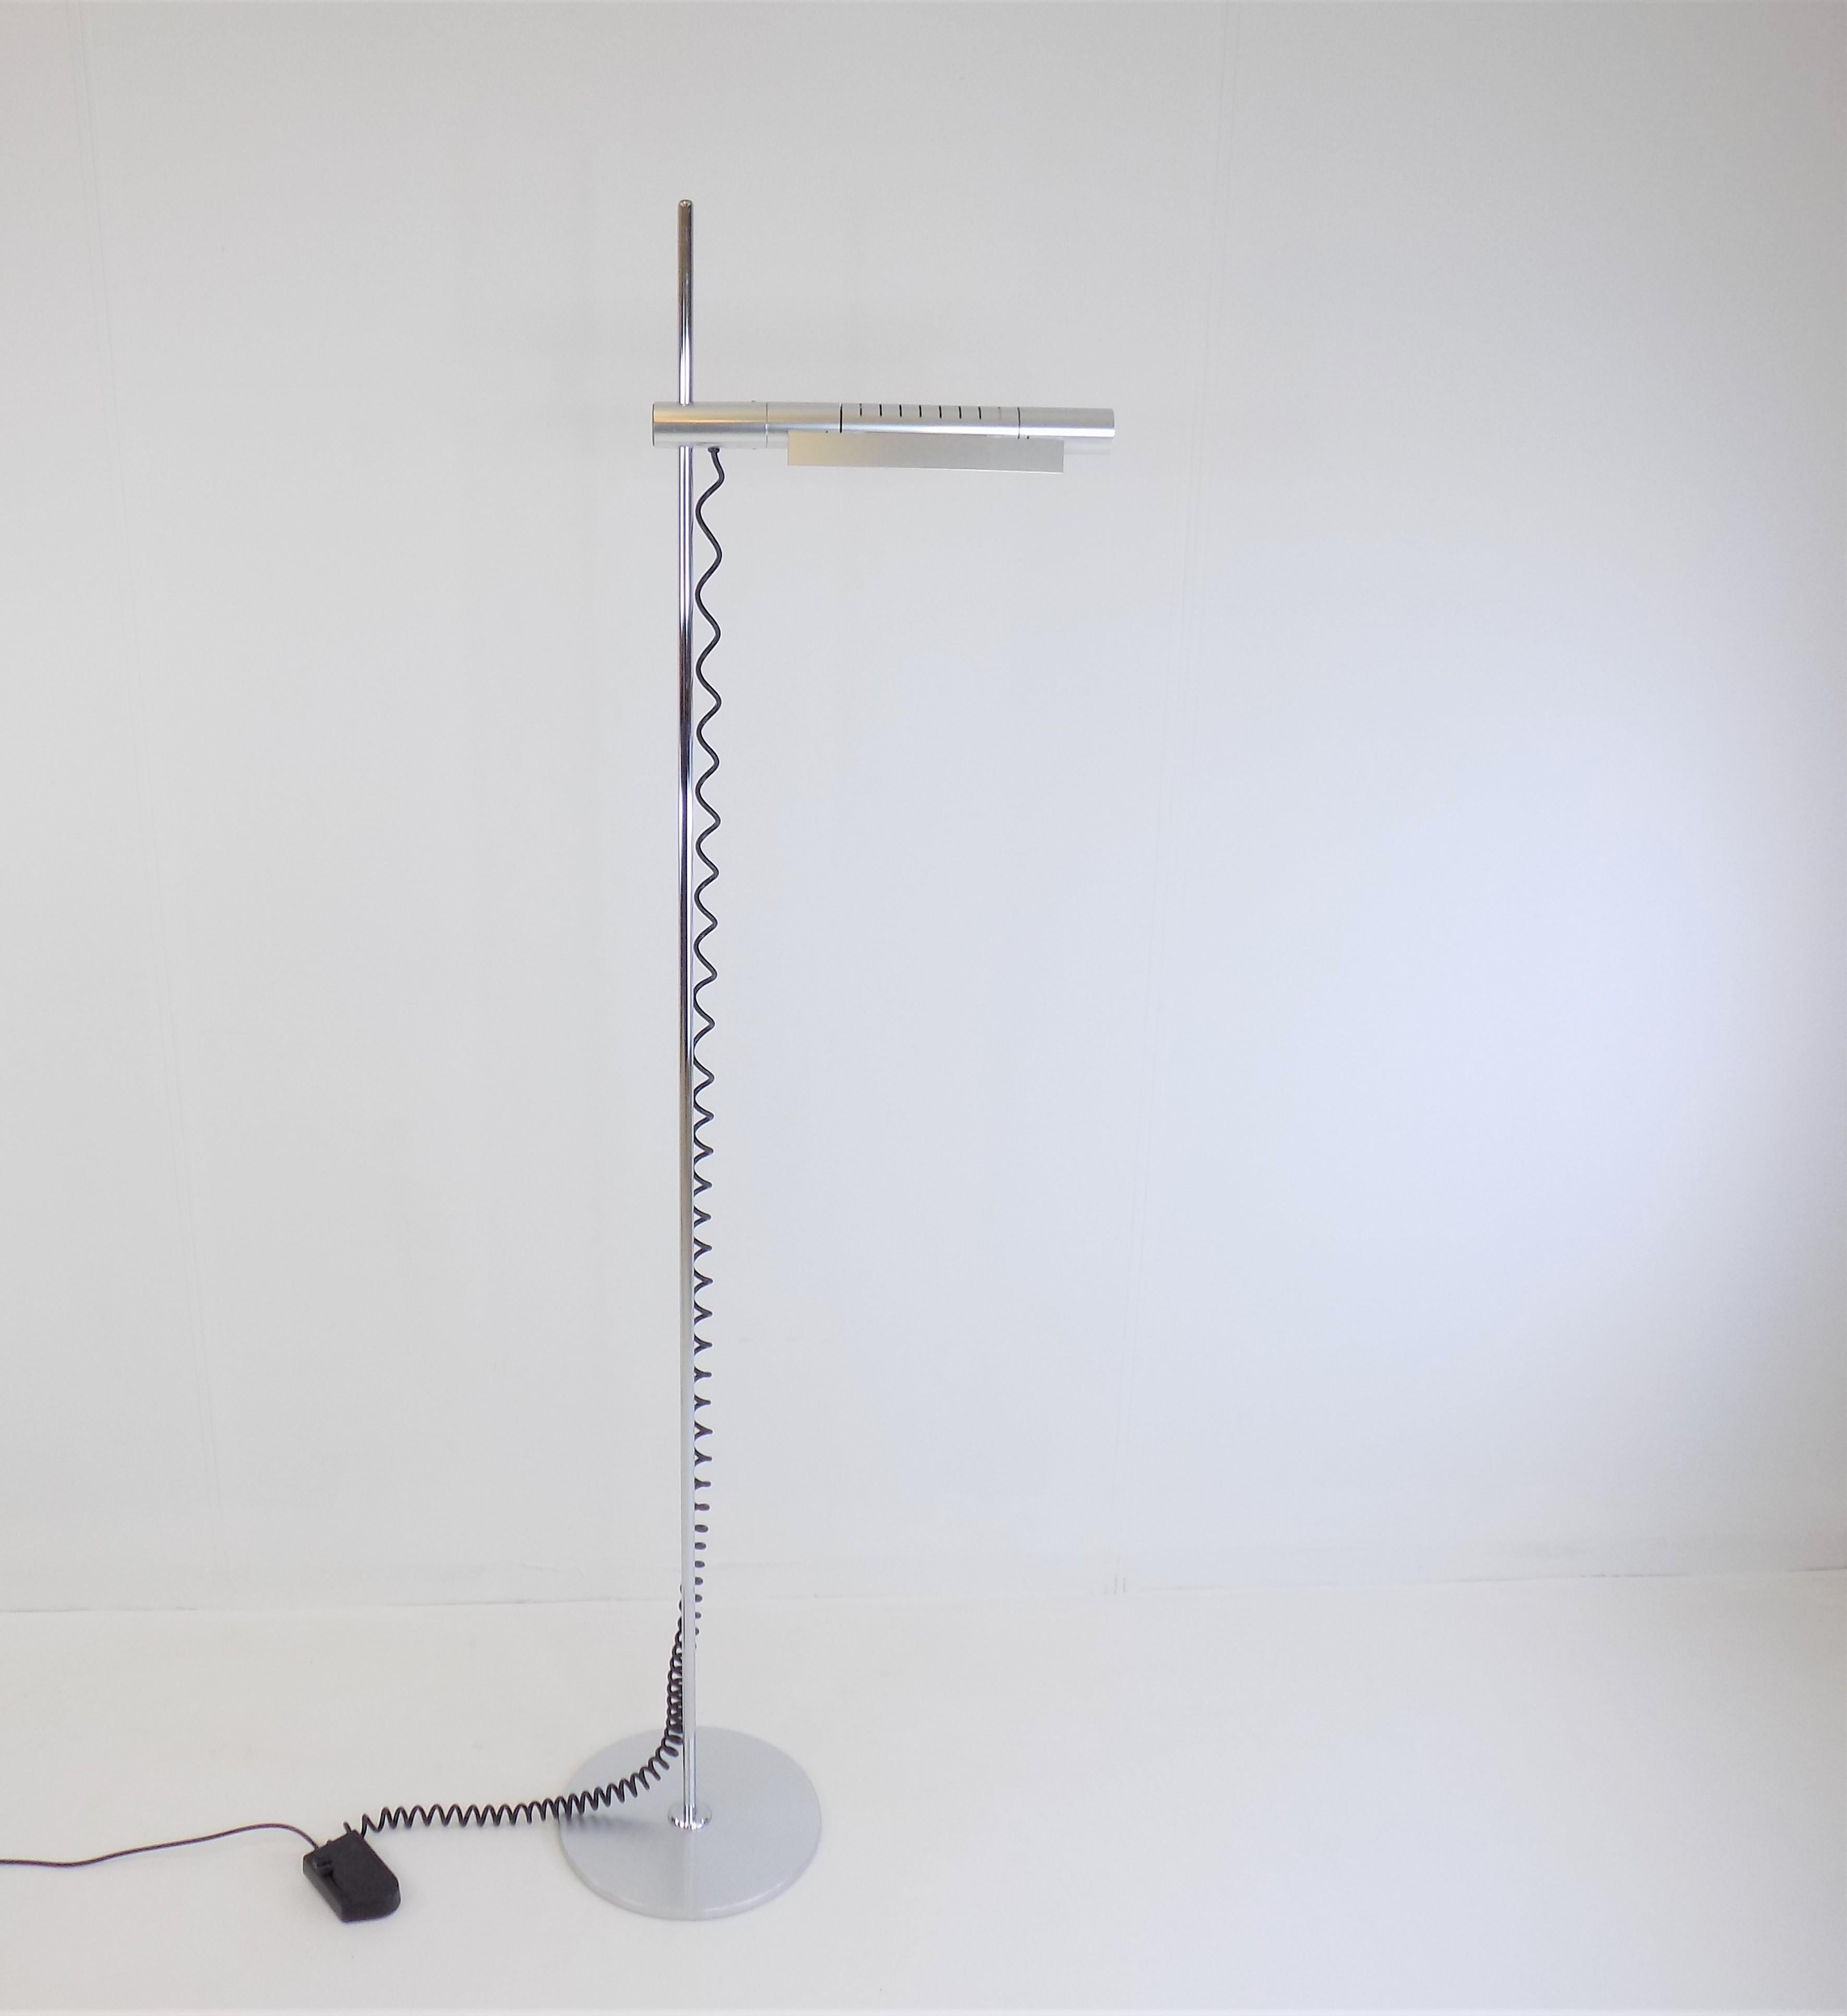 Post-Modern Swisslamps International Halo 250 Floor Lamp by R. and R. Baltensweiler For Sale